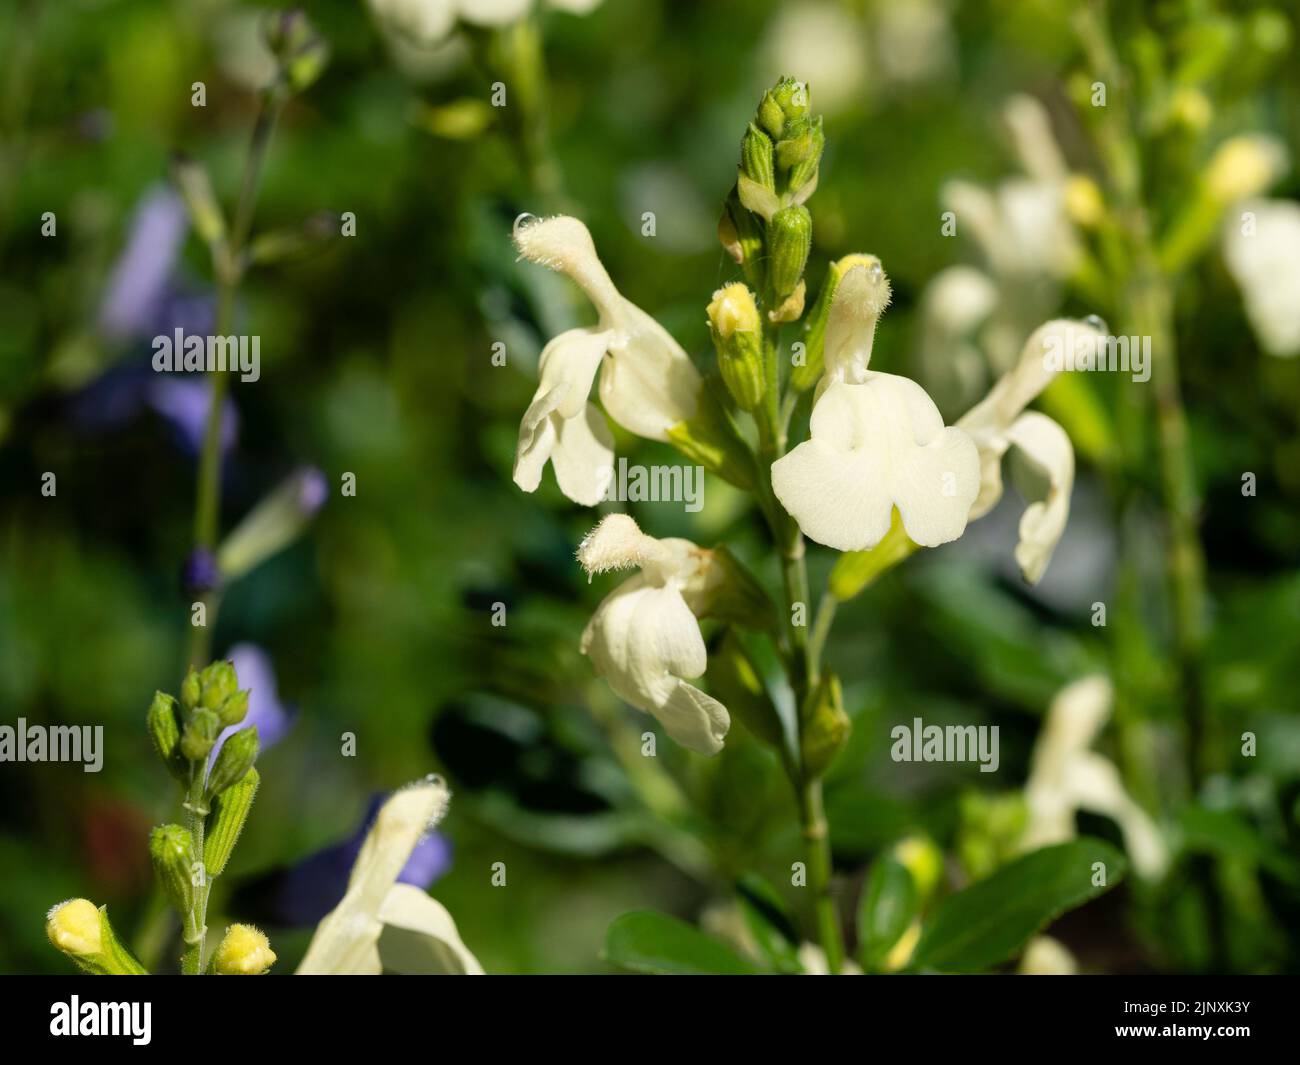 Flowers of the summer to autumn flowering sage, Salvia 'Clotted Cream' Stock Photo